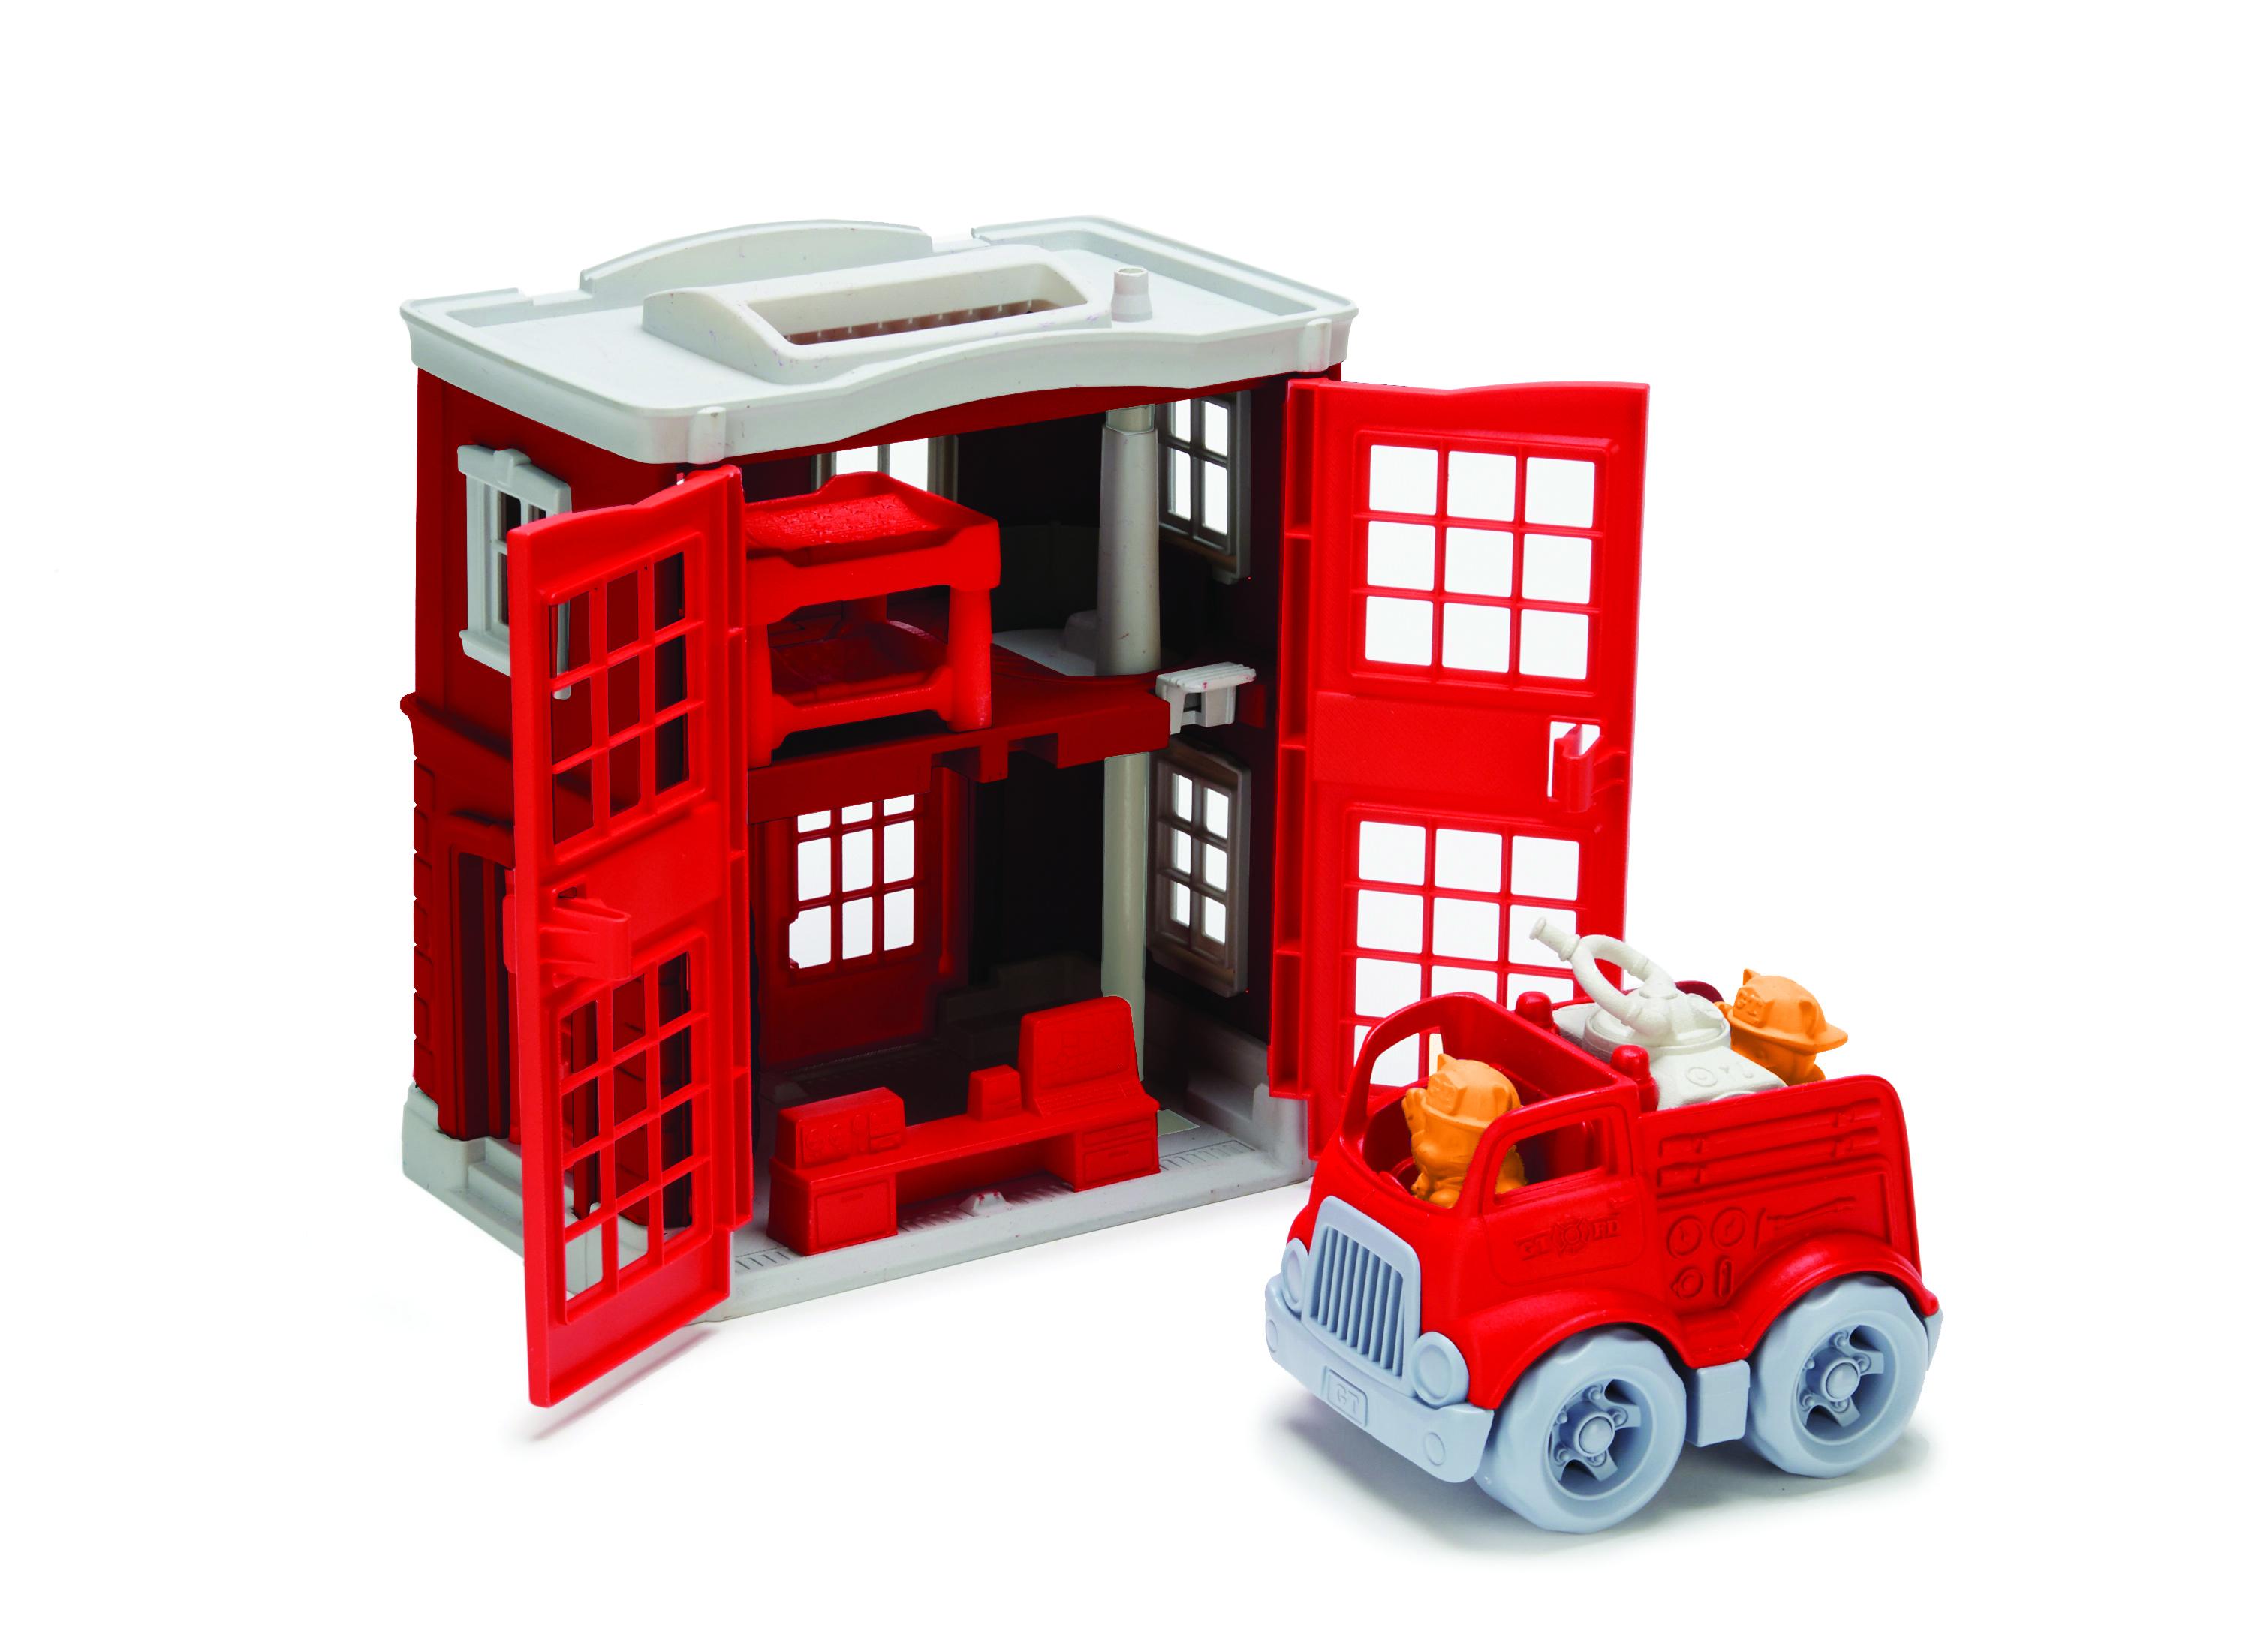 Fire station playset with front doors open wide and fire engine in front.